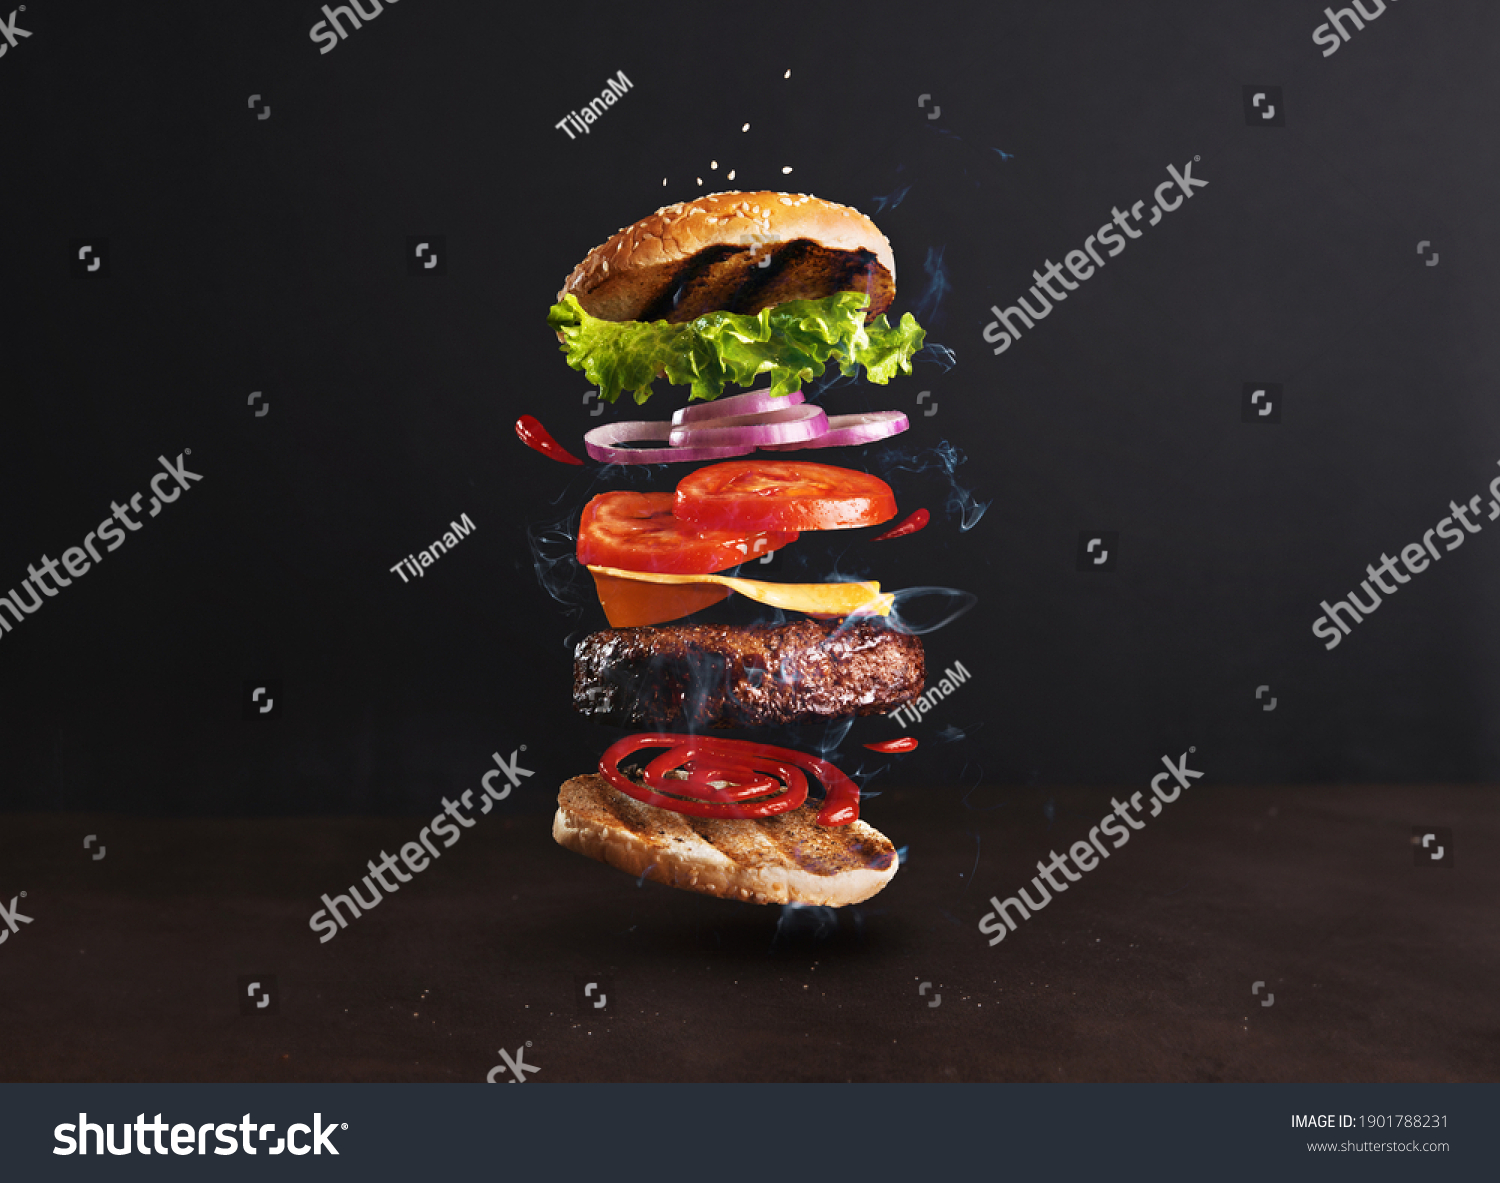 Delicious, juicy burger layers over a dark background #1901788231